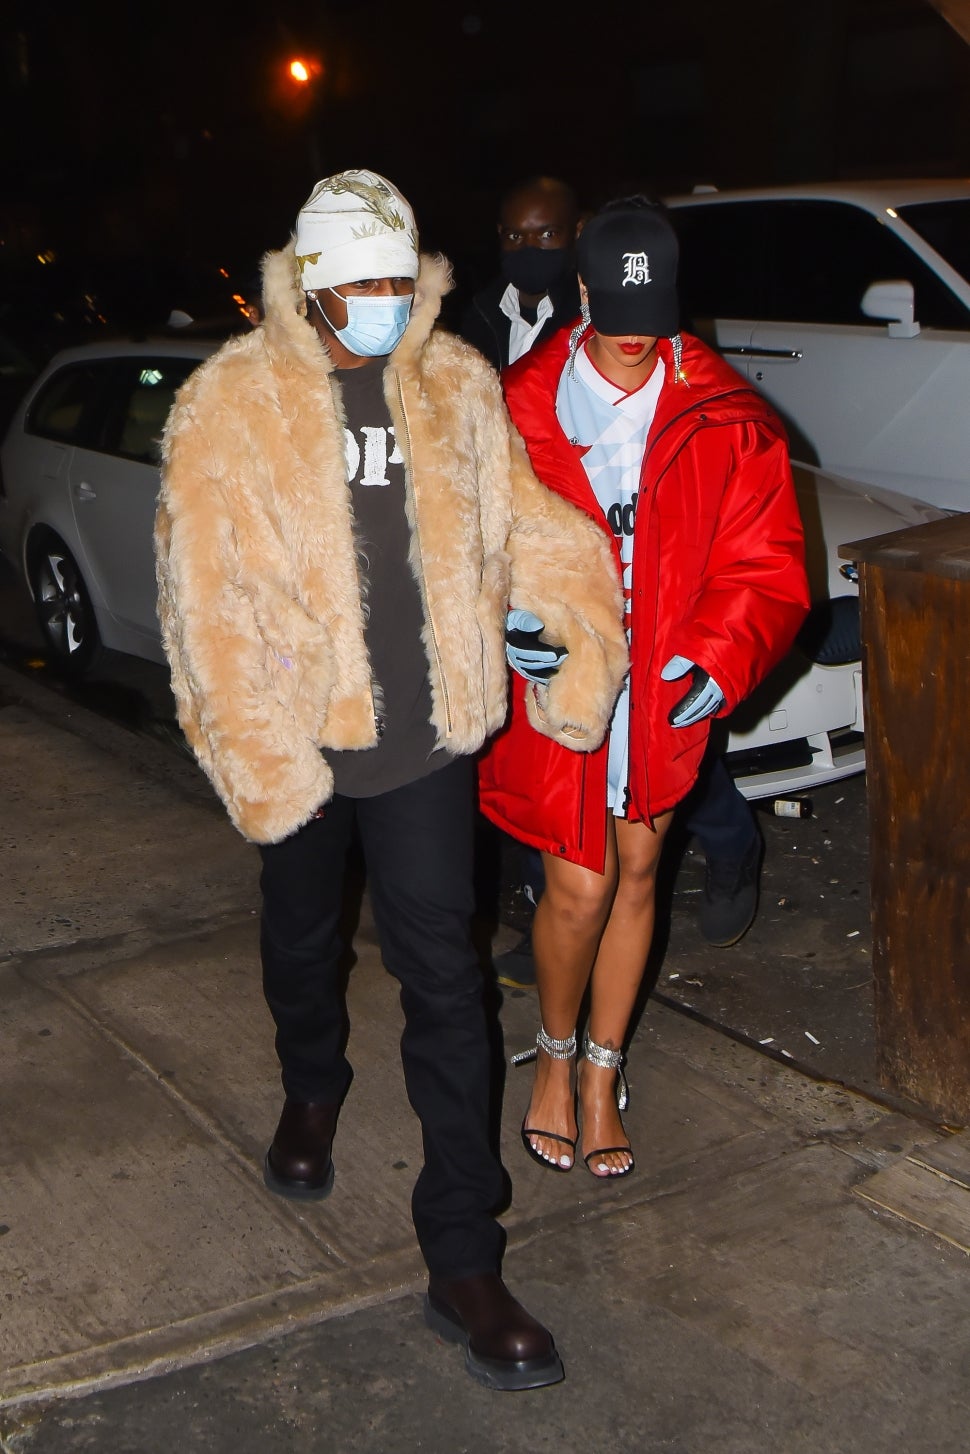 Rihanna and ASAP Rocky are seen out for dinner in SoHo on January 22, 2022 in New York City.